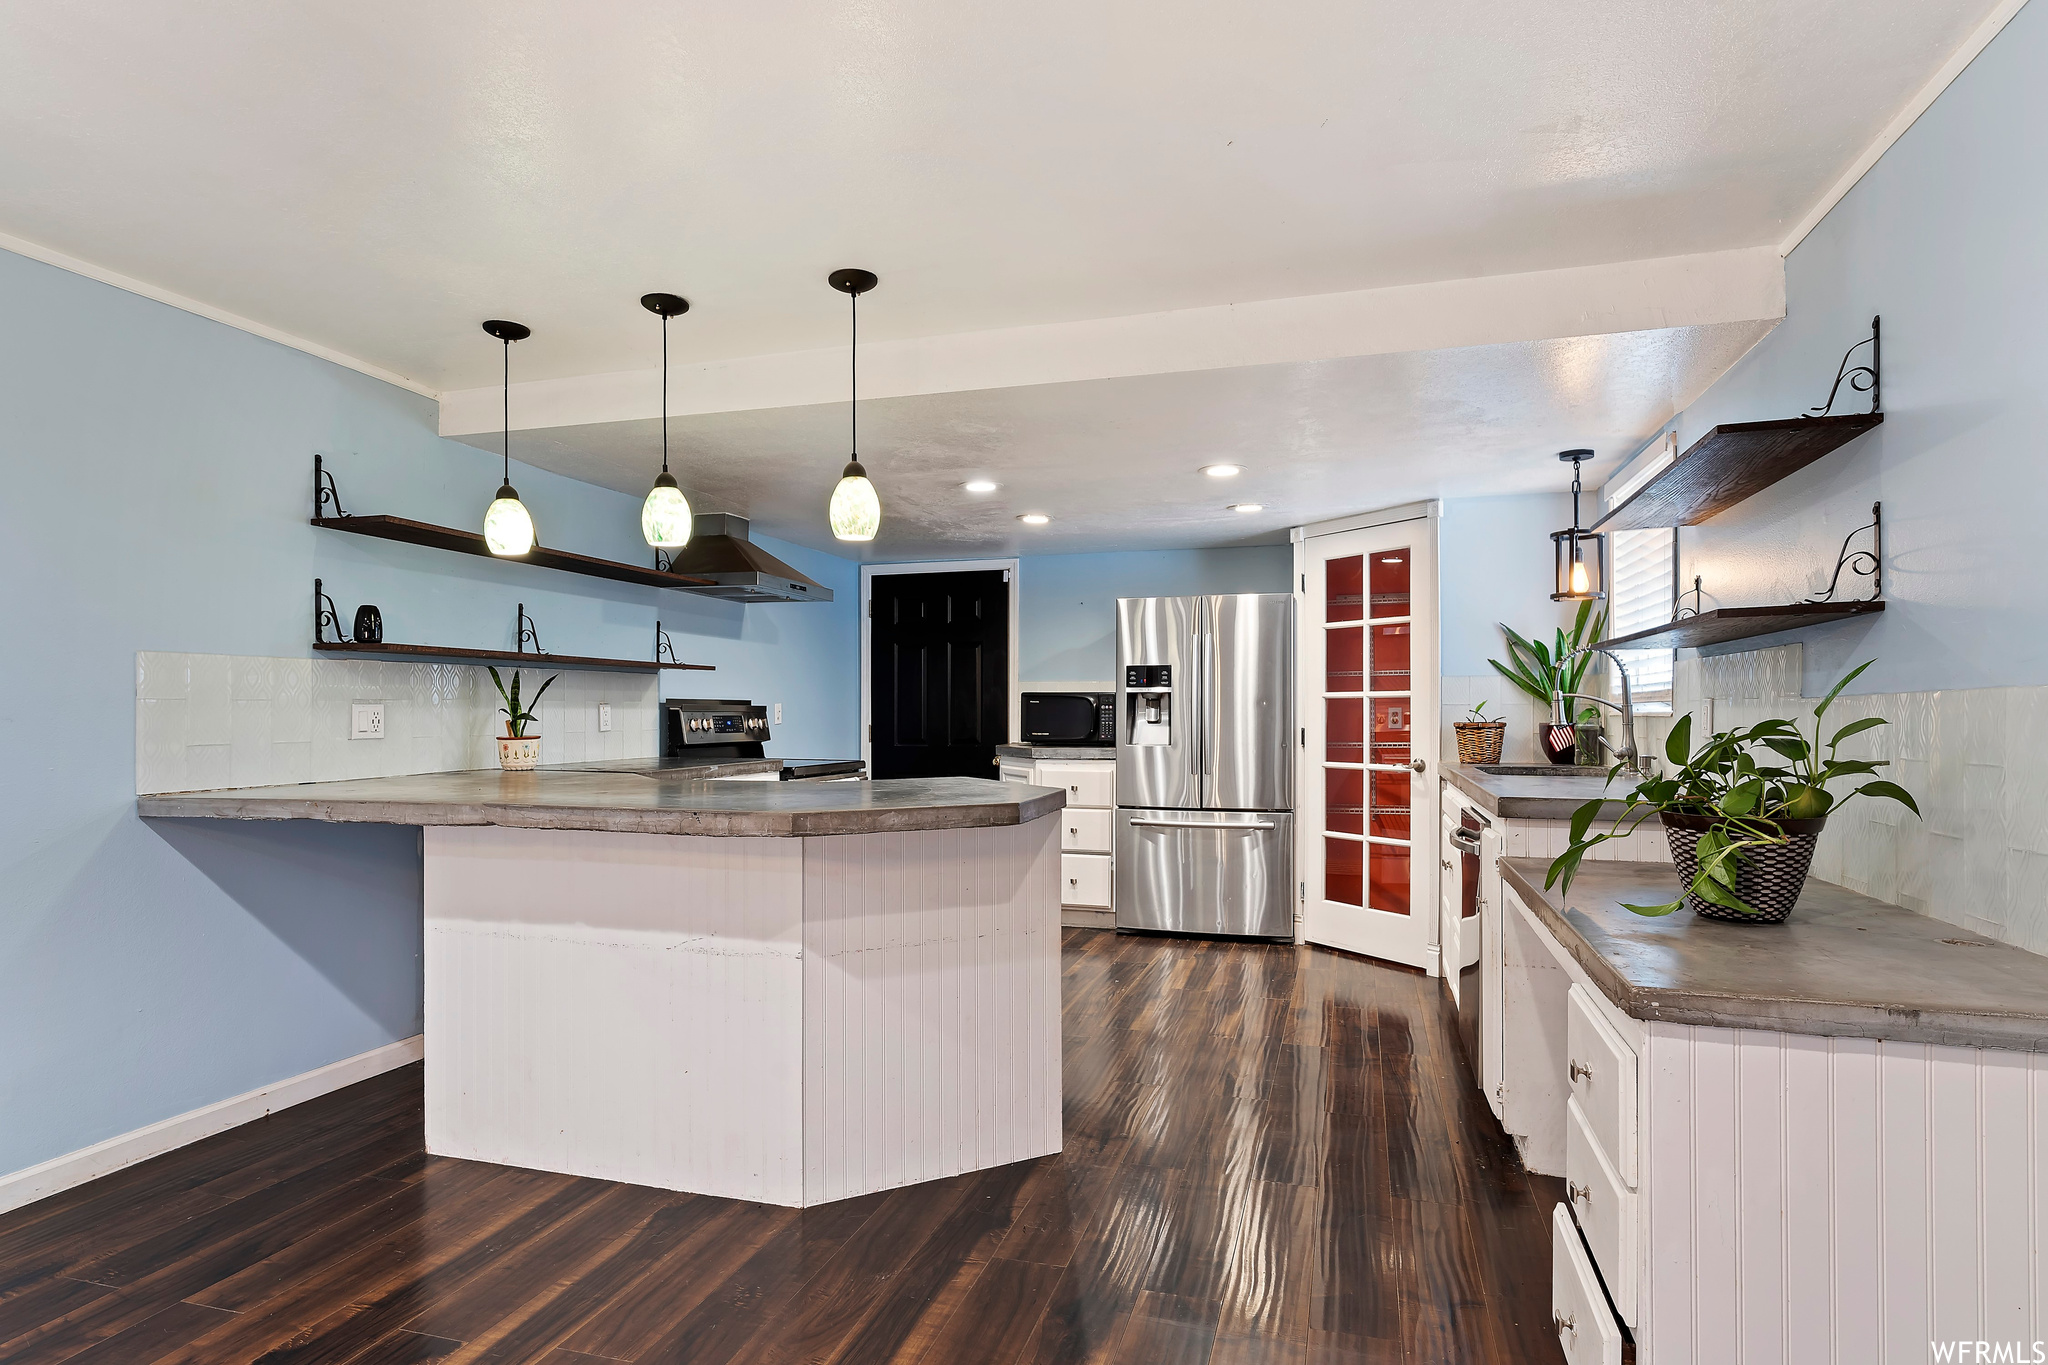 Kitchen featuring pendant lighting, dark wood-type flooring, white cabinets, and stainless steel appliances